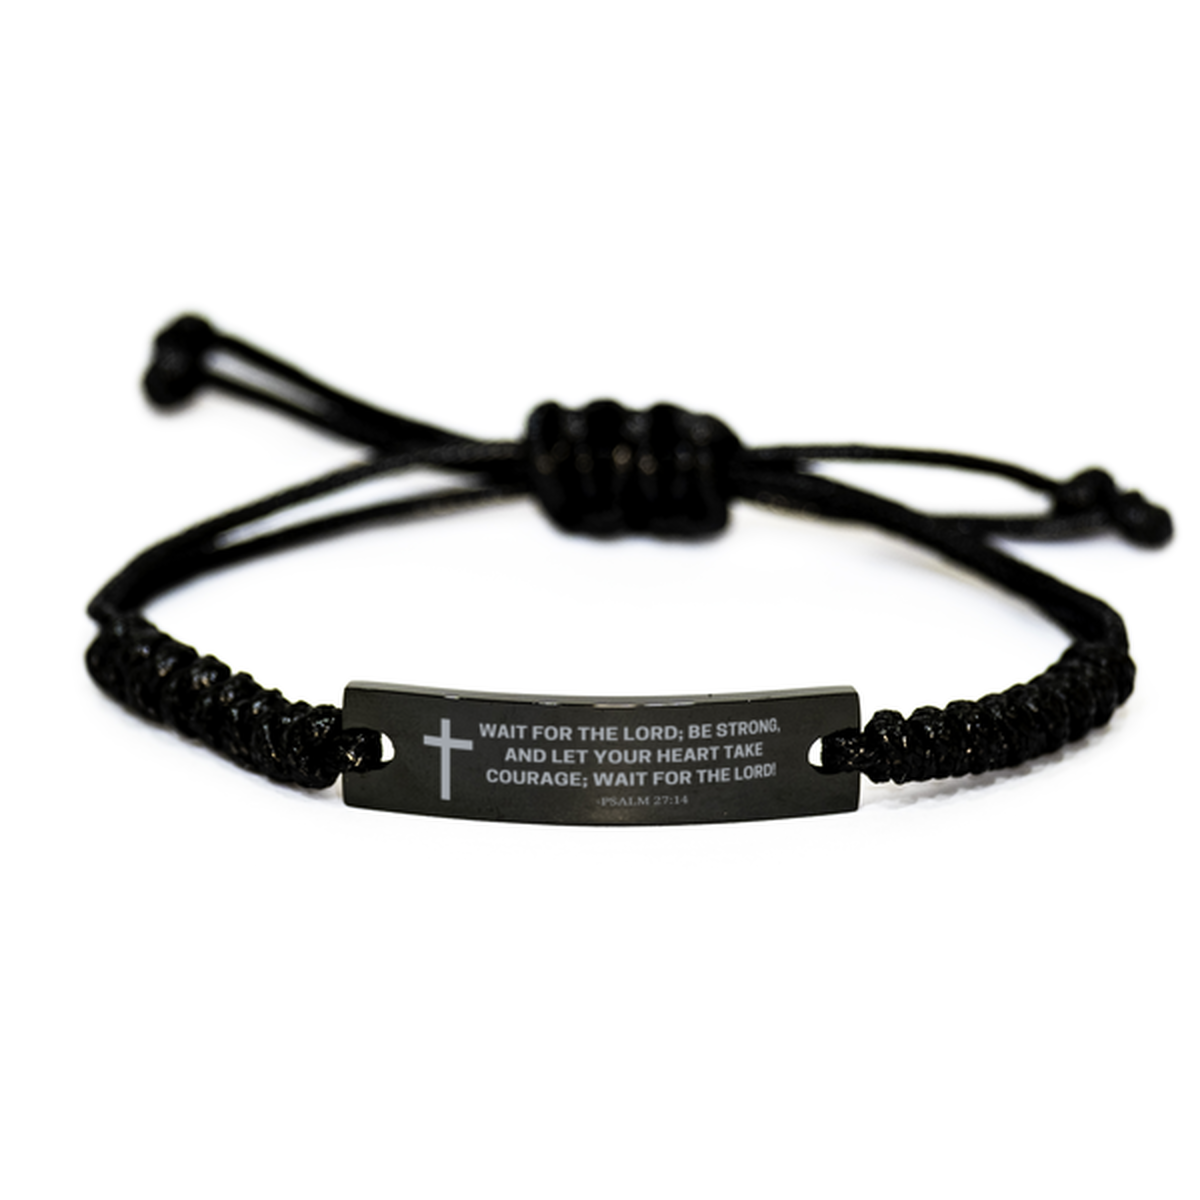 Baptism Gifts For Teenage Boys Girls, Christian Bible Verse Black Rope Bracelet, Wait for the Lord, Catholic Confirmation Gifts for Son, Godson, Grandson, Nephew